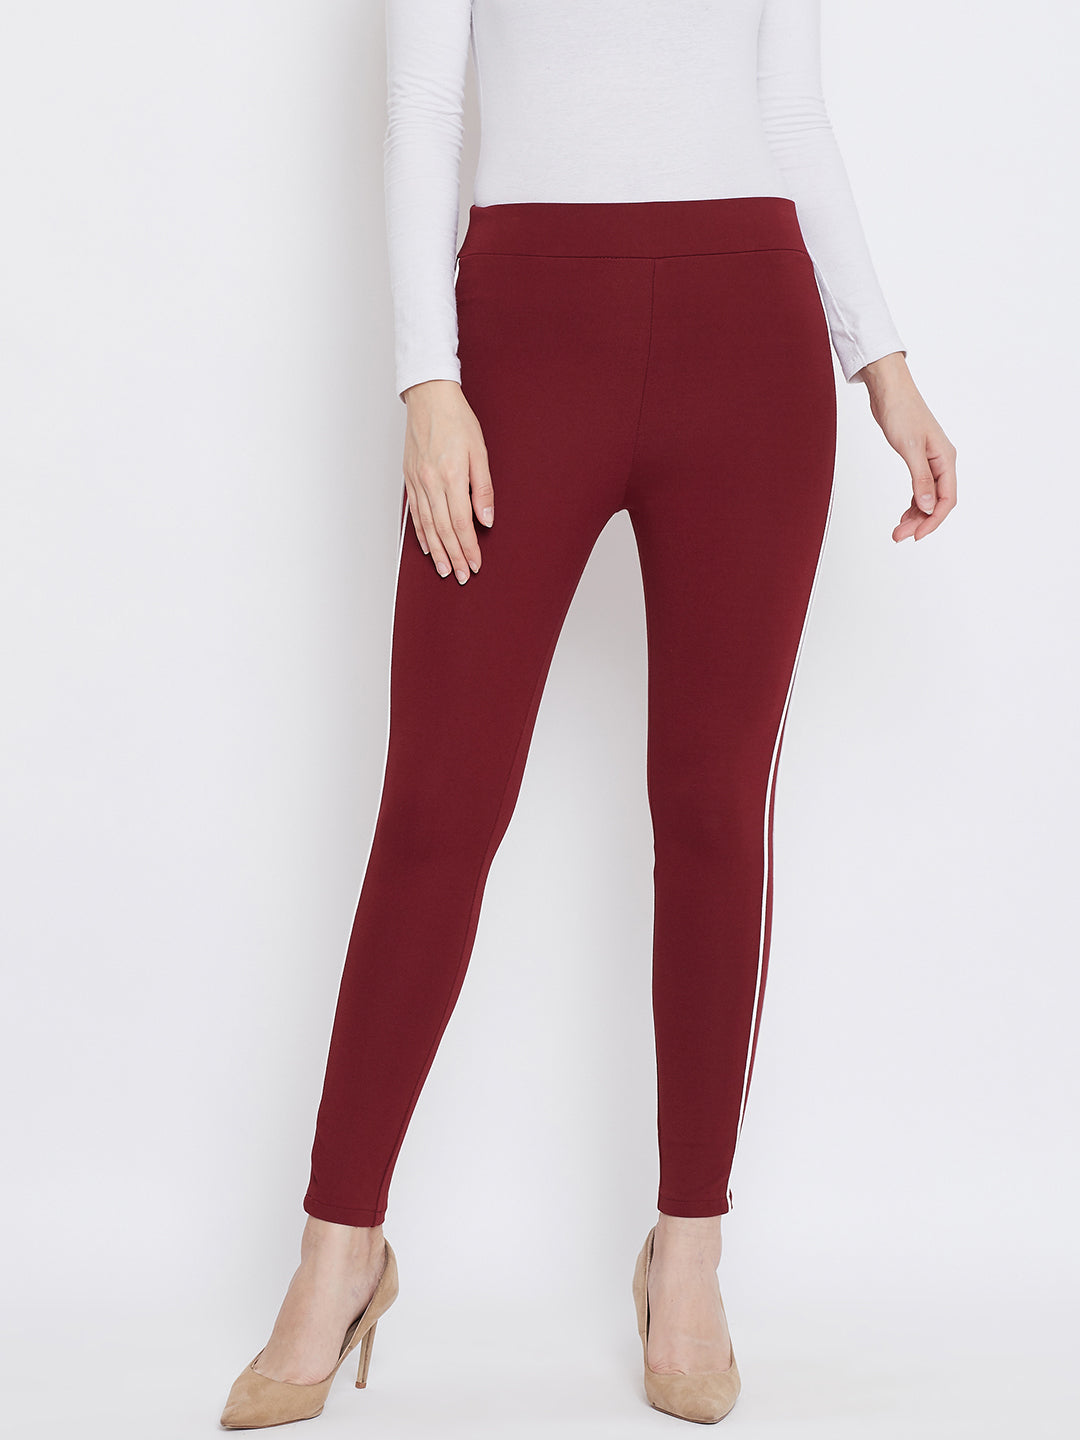 Clora Maroon Solid Striped Jeggings